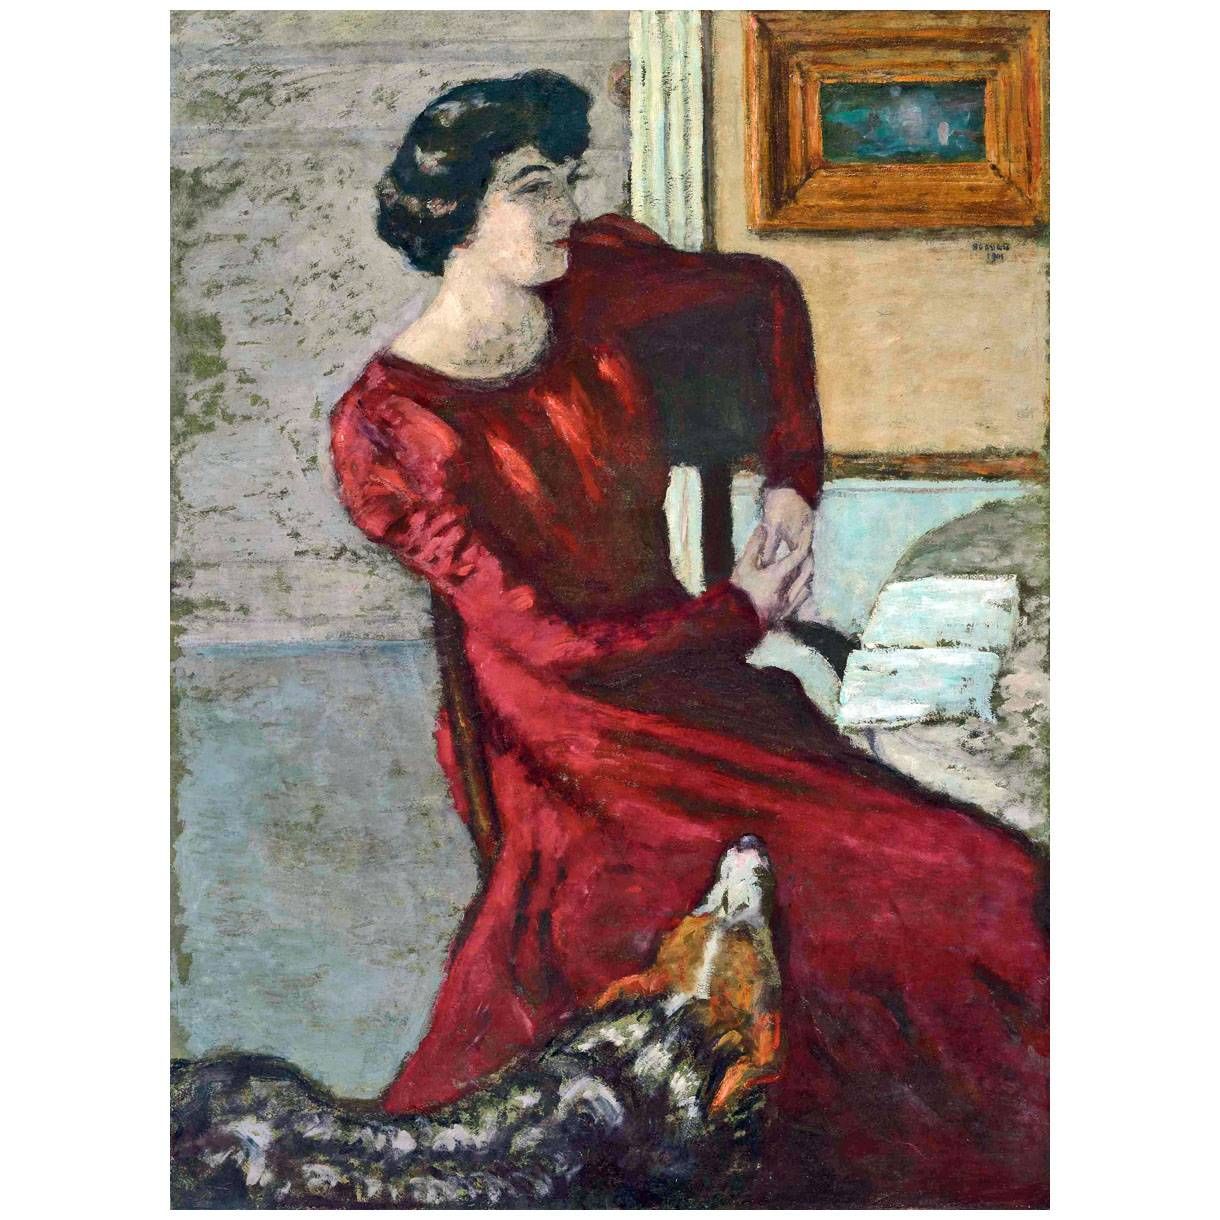 Pierre Bonnard. La dame in rouge. 1901. Private collection